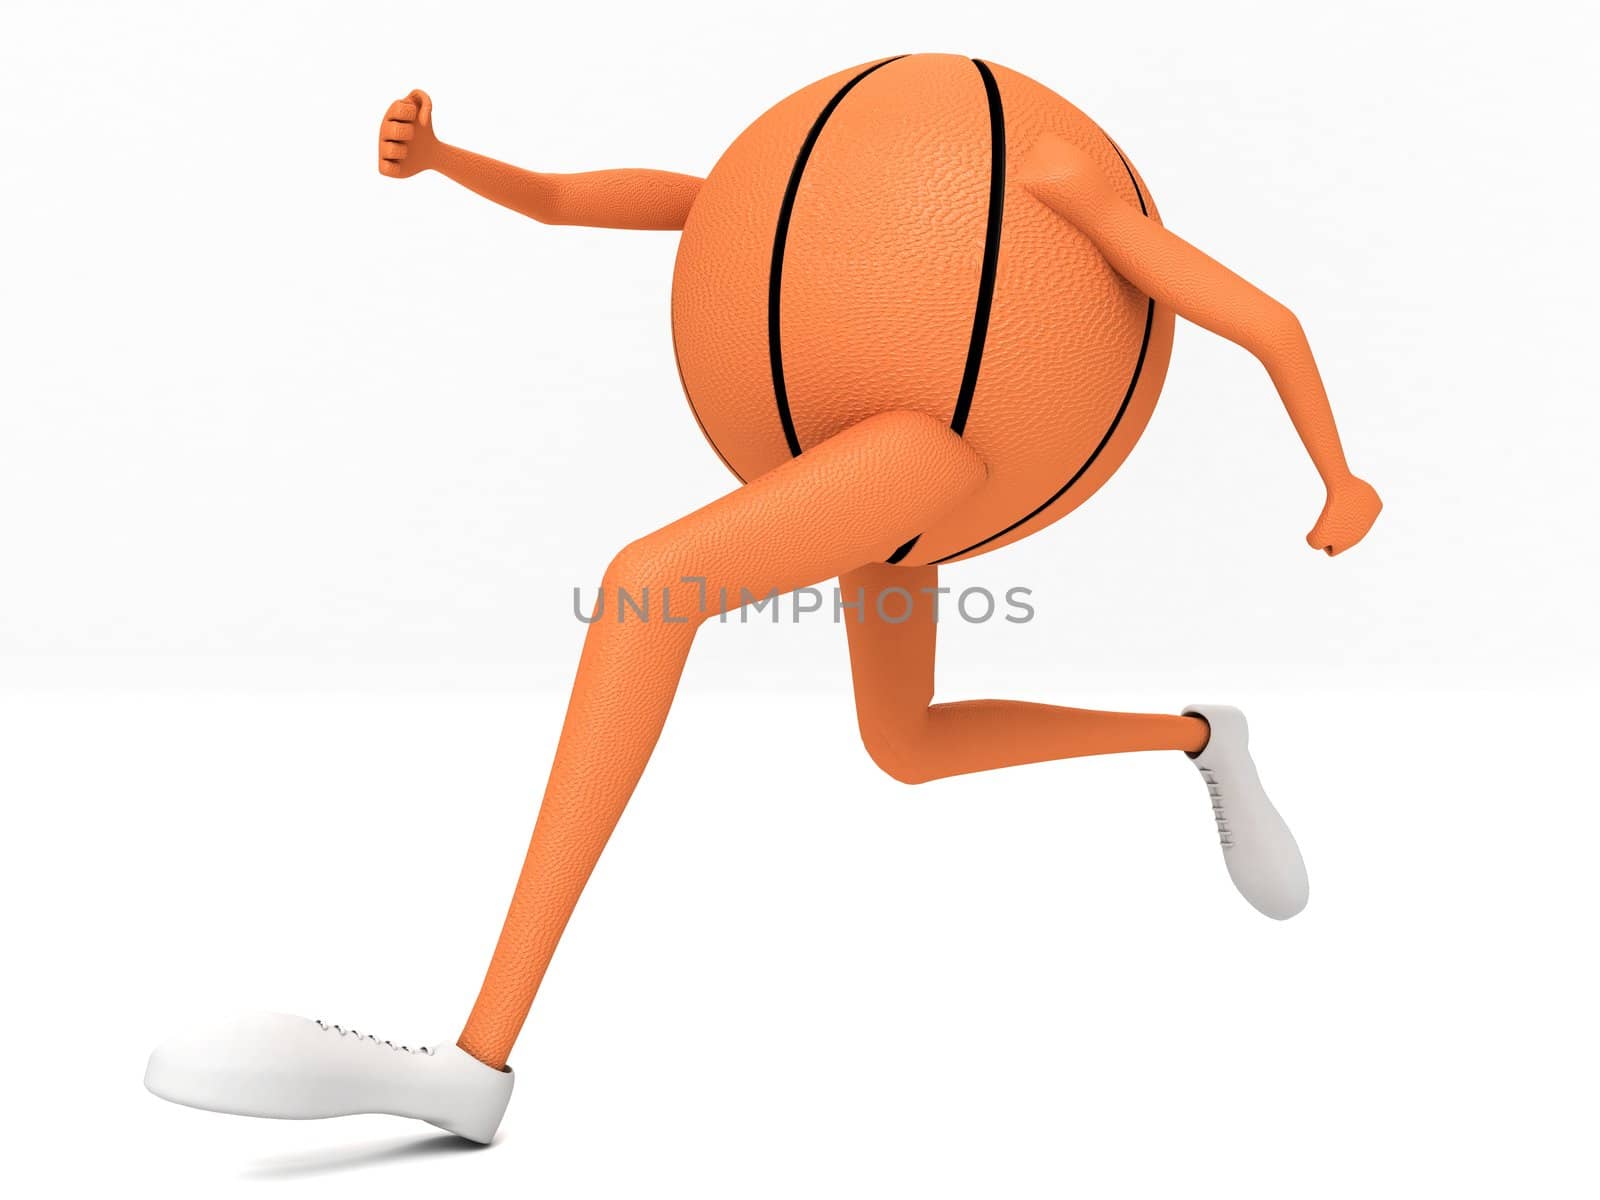 three dimensional side view of running basket ball by imagerymajestic